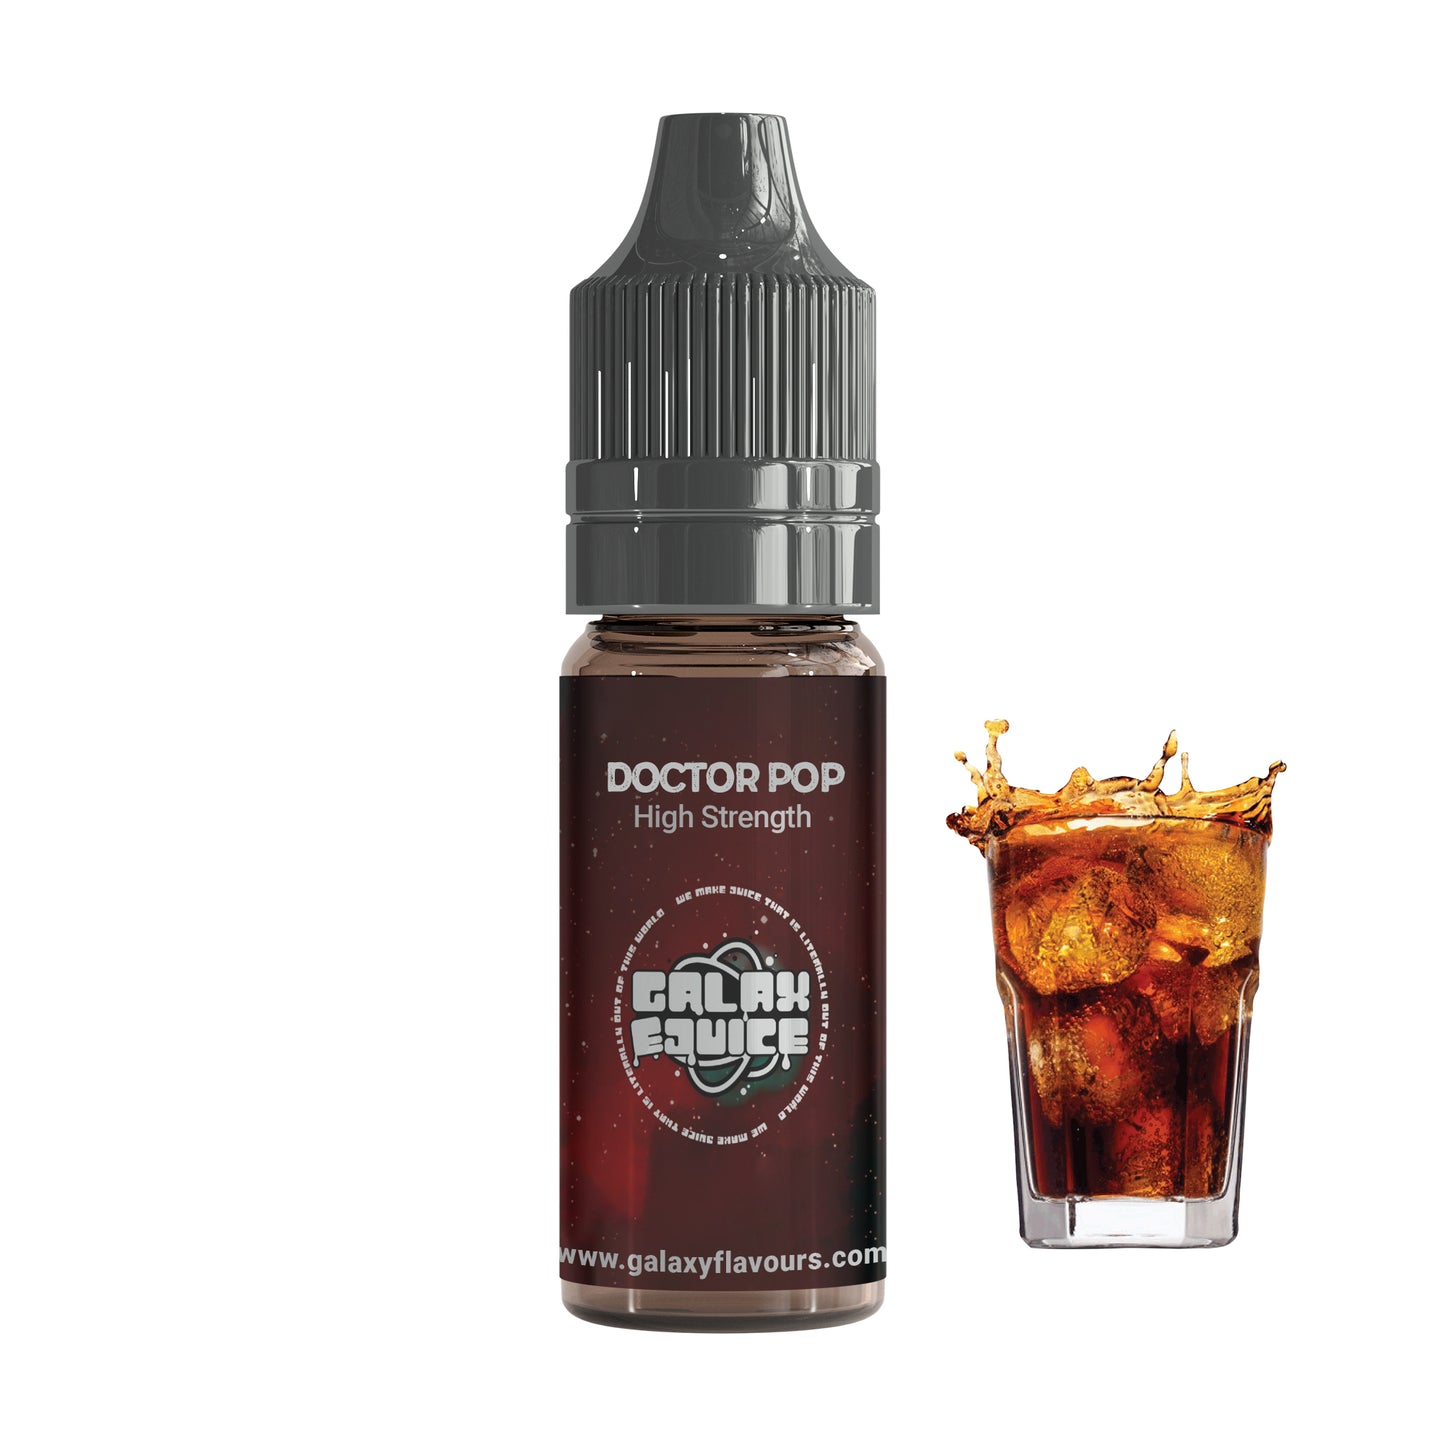 Doctor Pop High Strength Professional Flavouring.